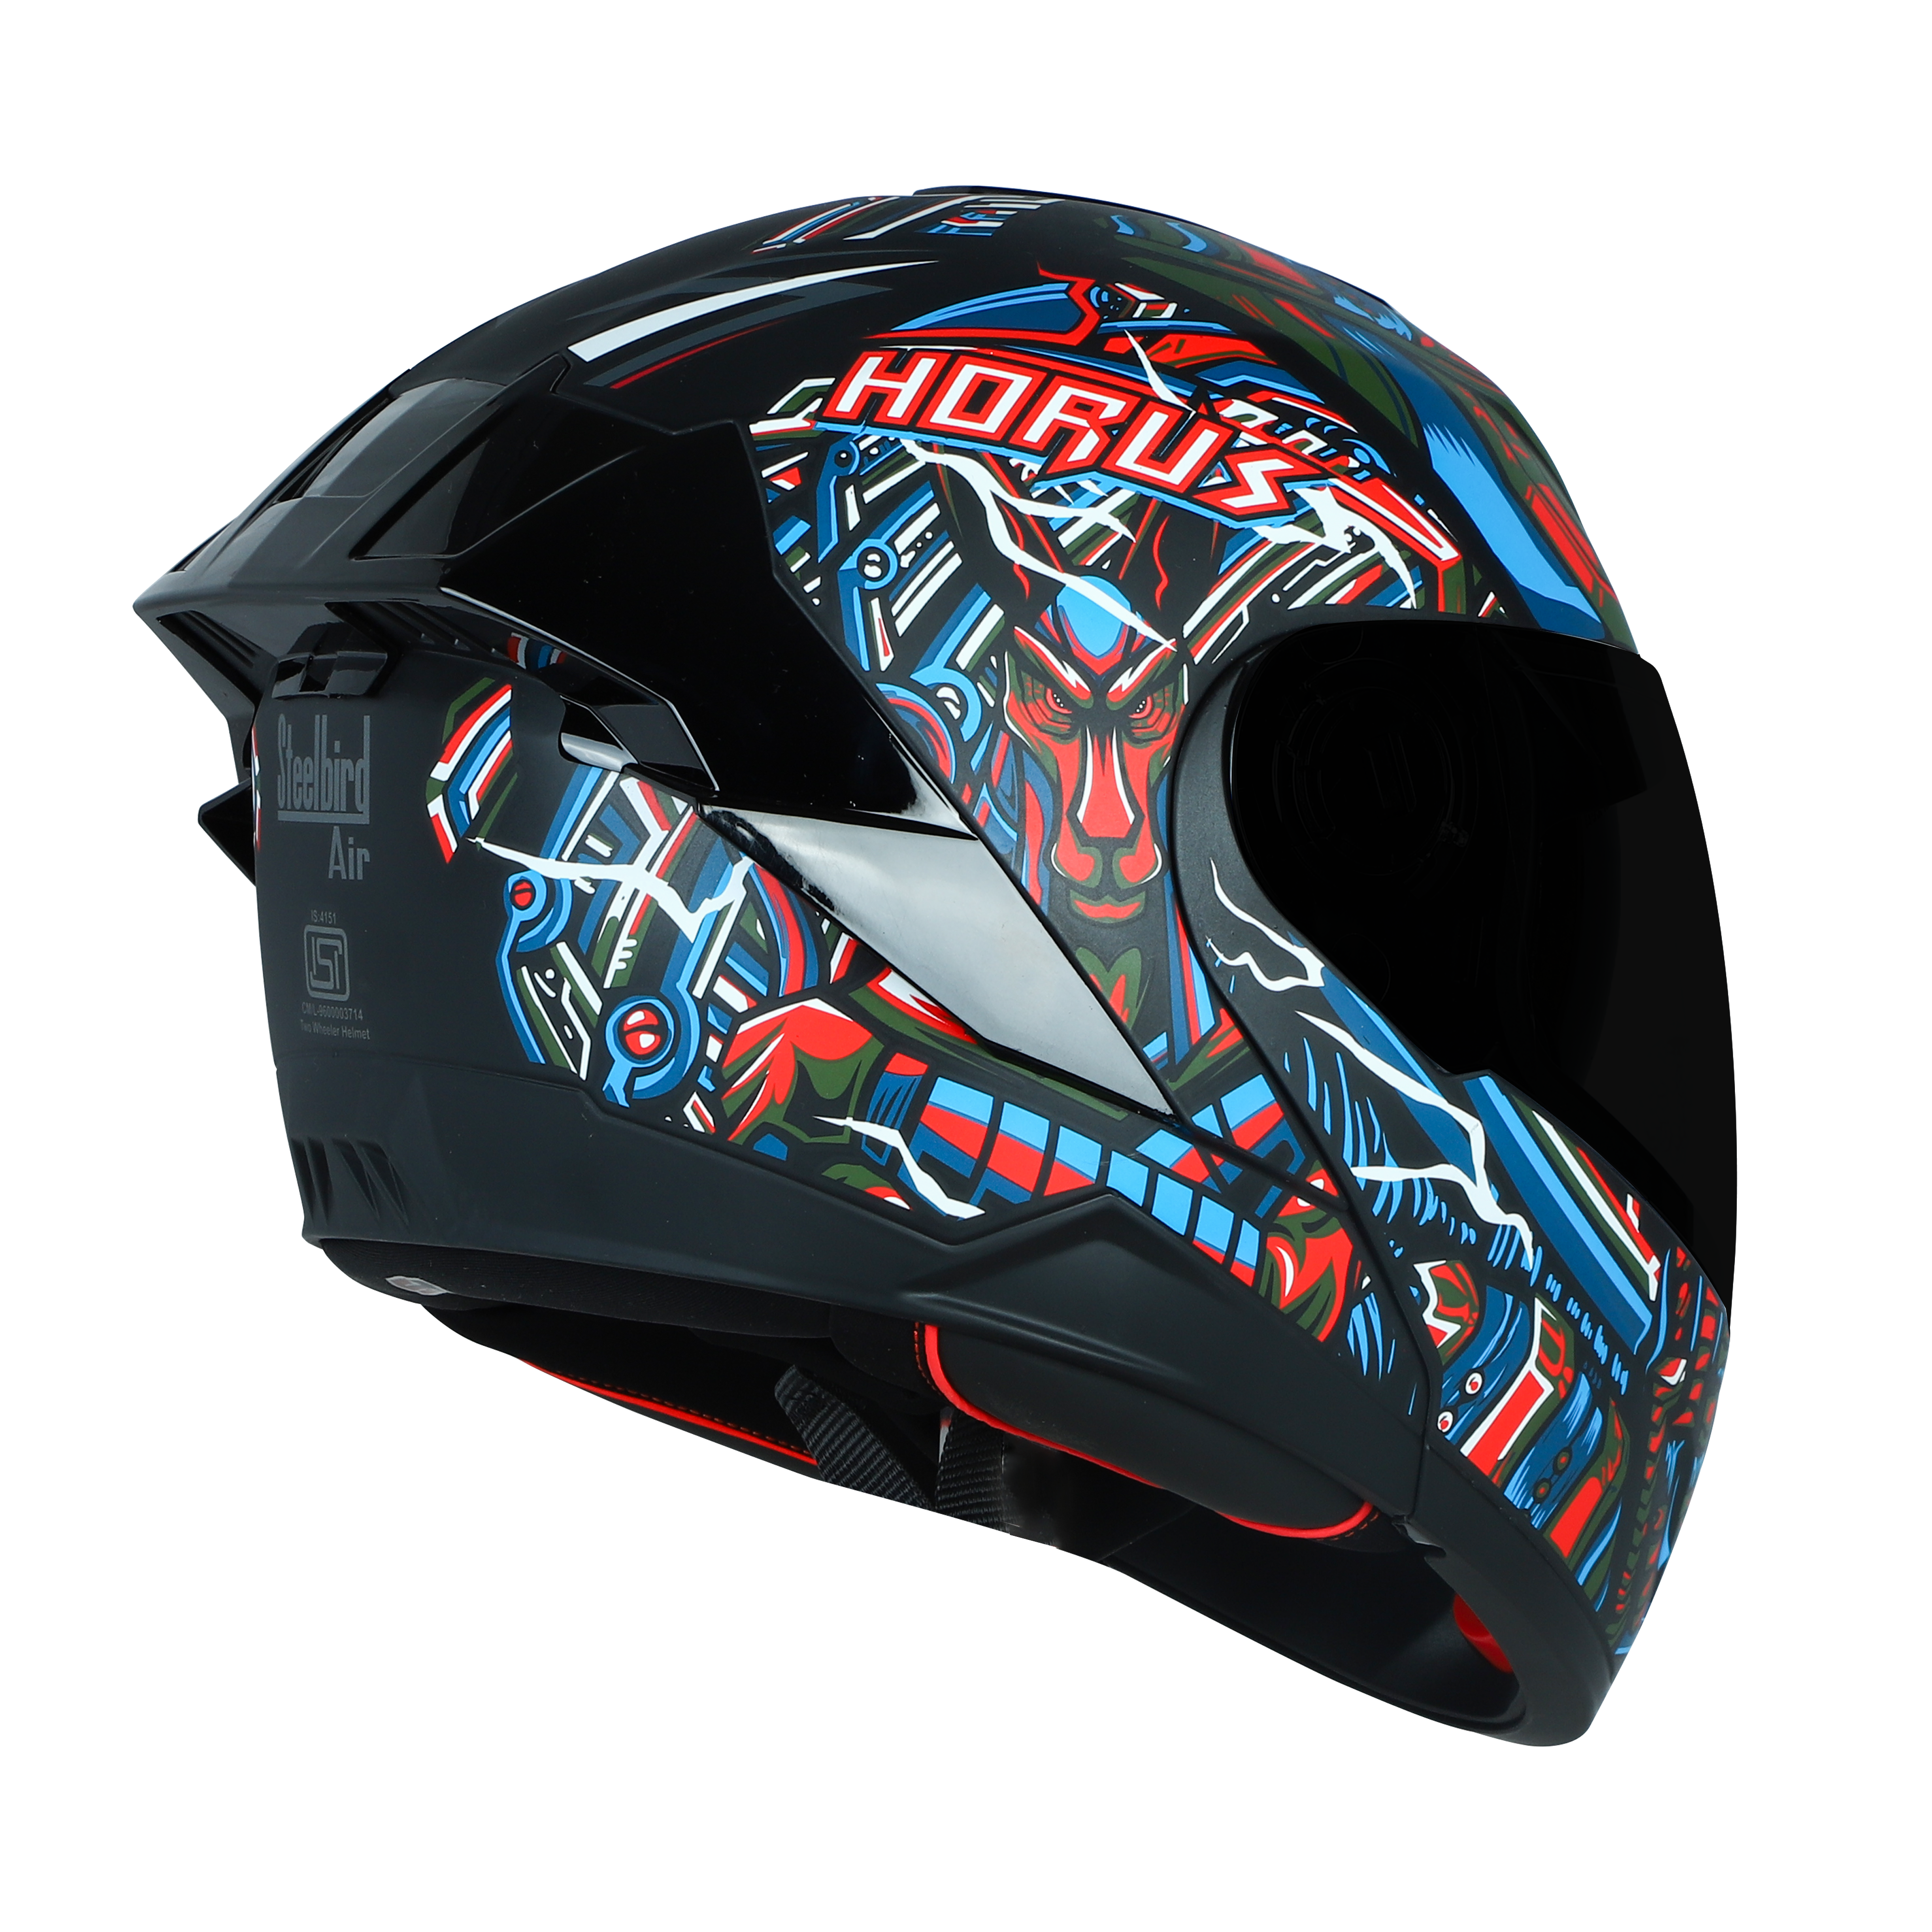 SBA-8 ISS HORUS GLOSSY BLACK WITH RED